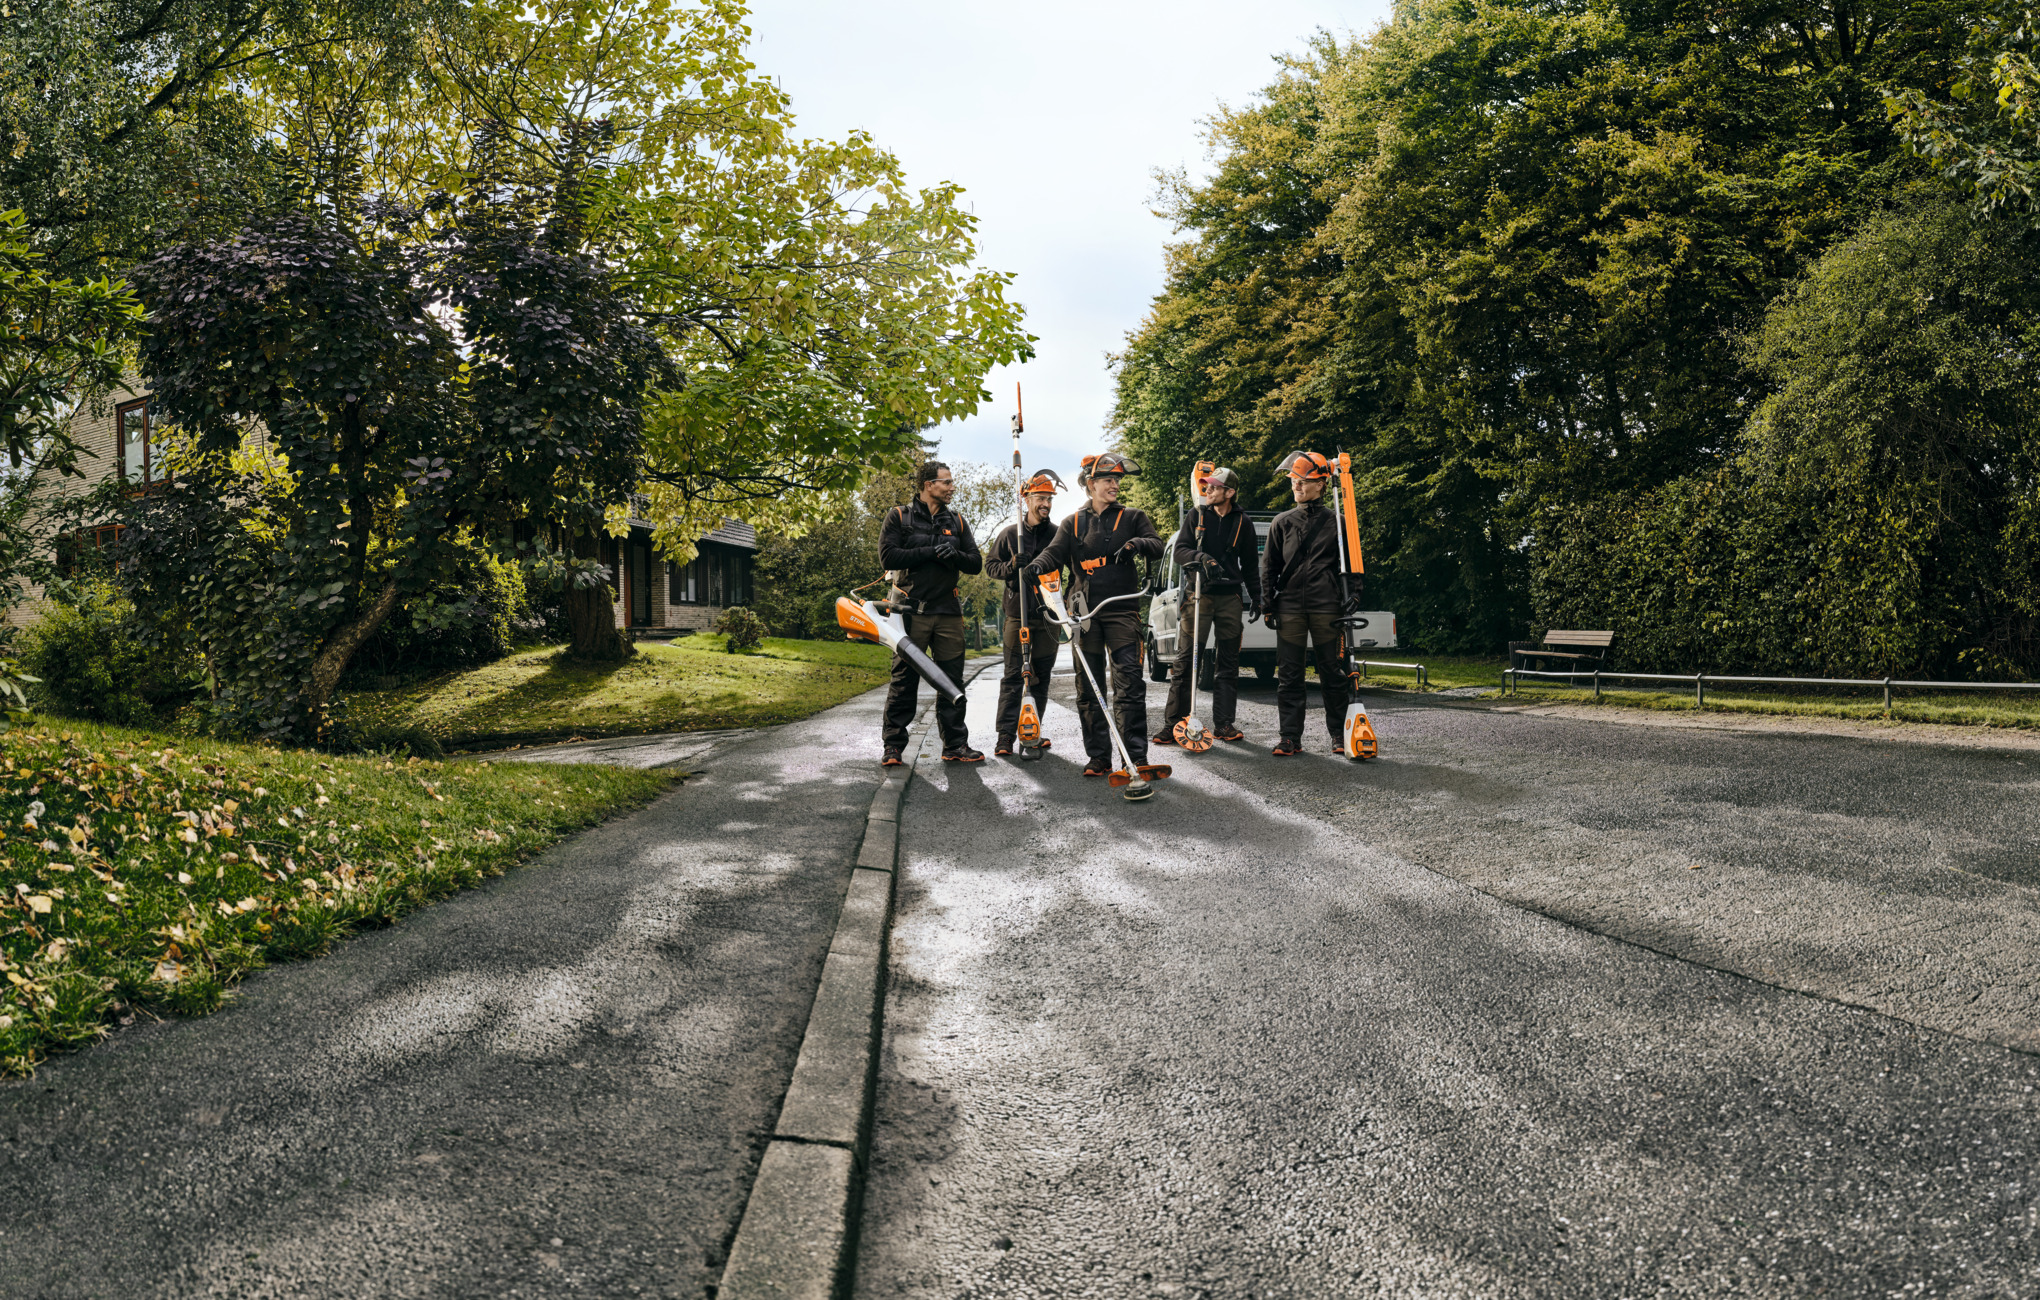 Five STIHL professionals walking along a road holding battery power tools